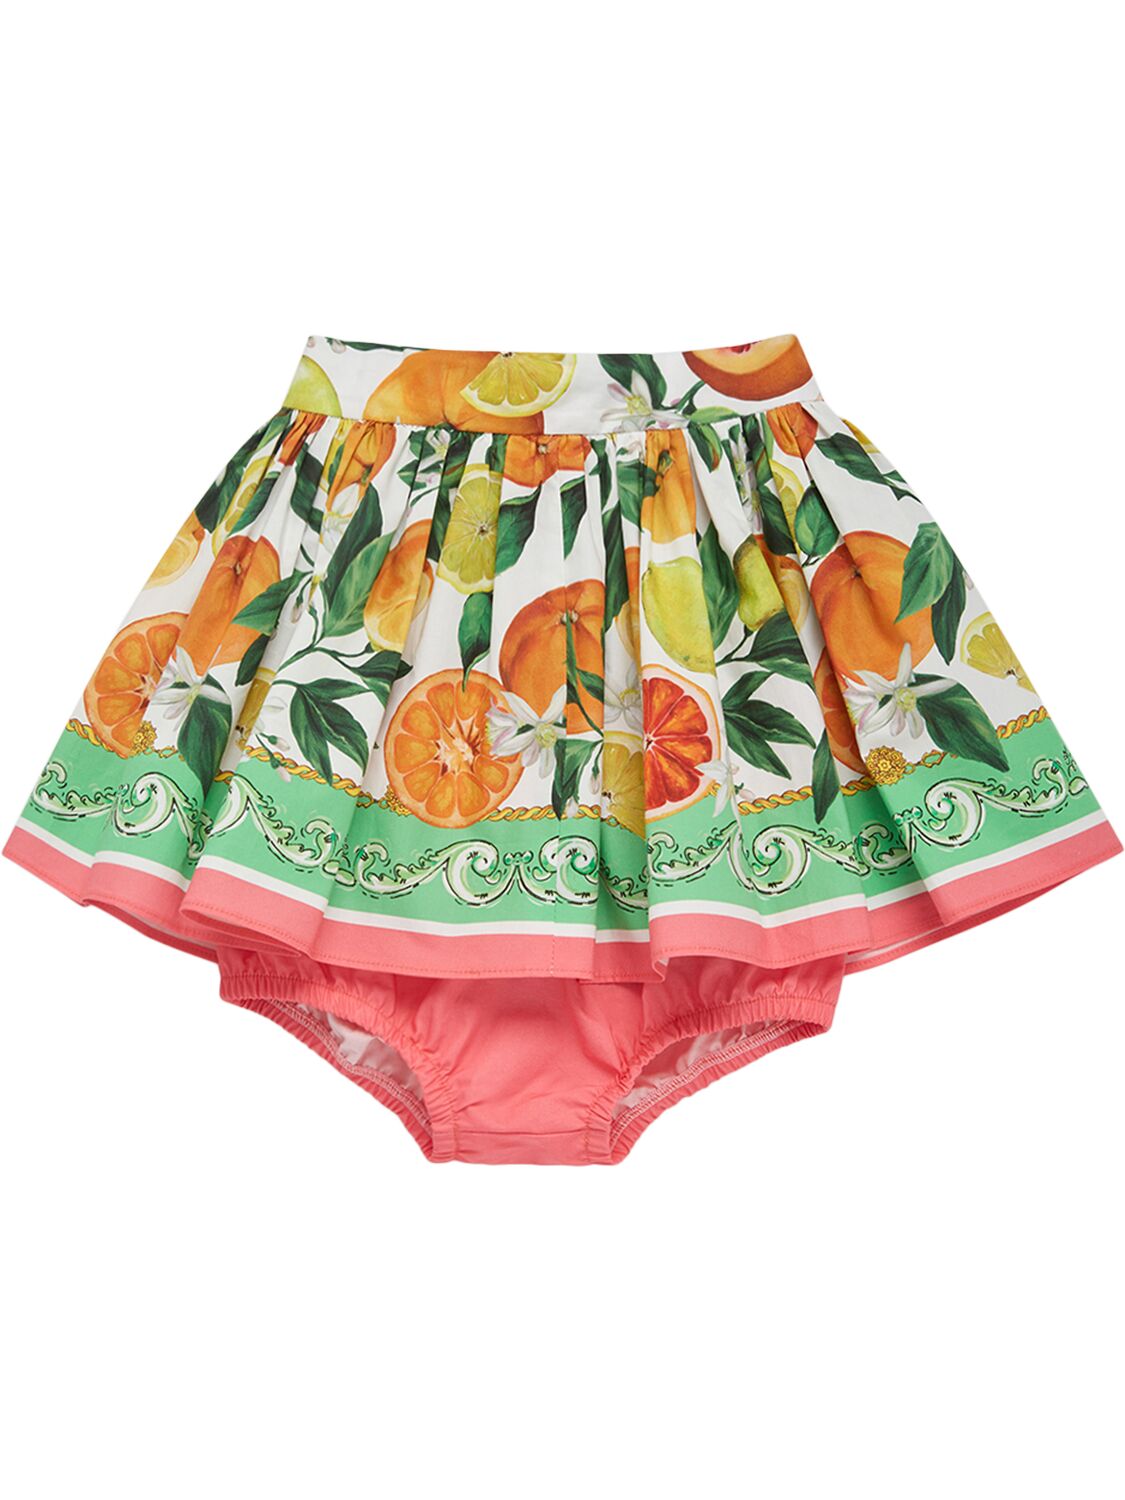 Image of Flower Print Cotton Skirt W/diaper Cover